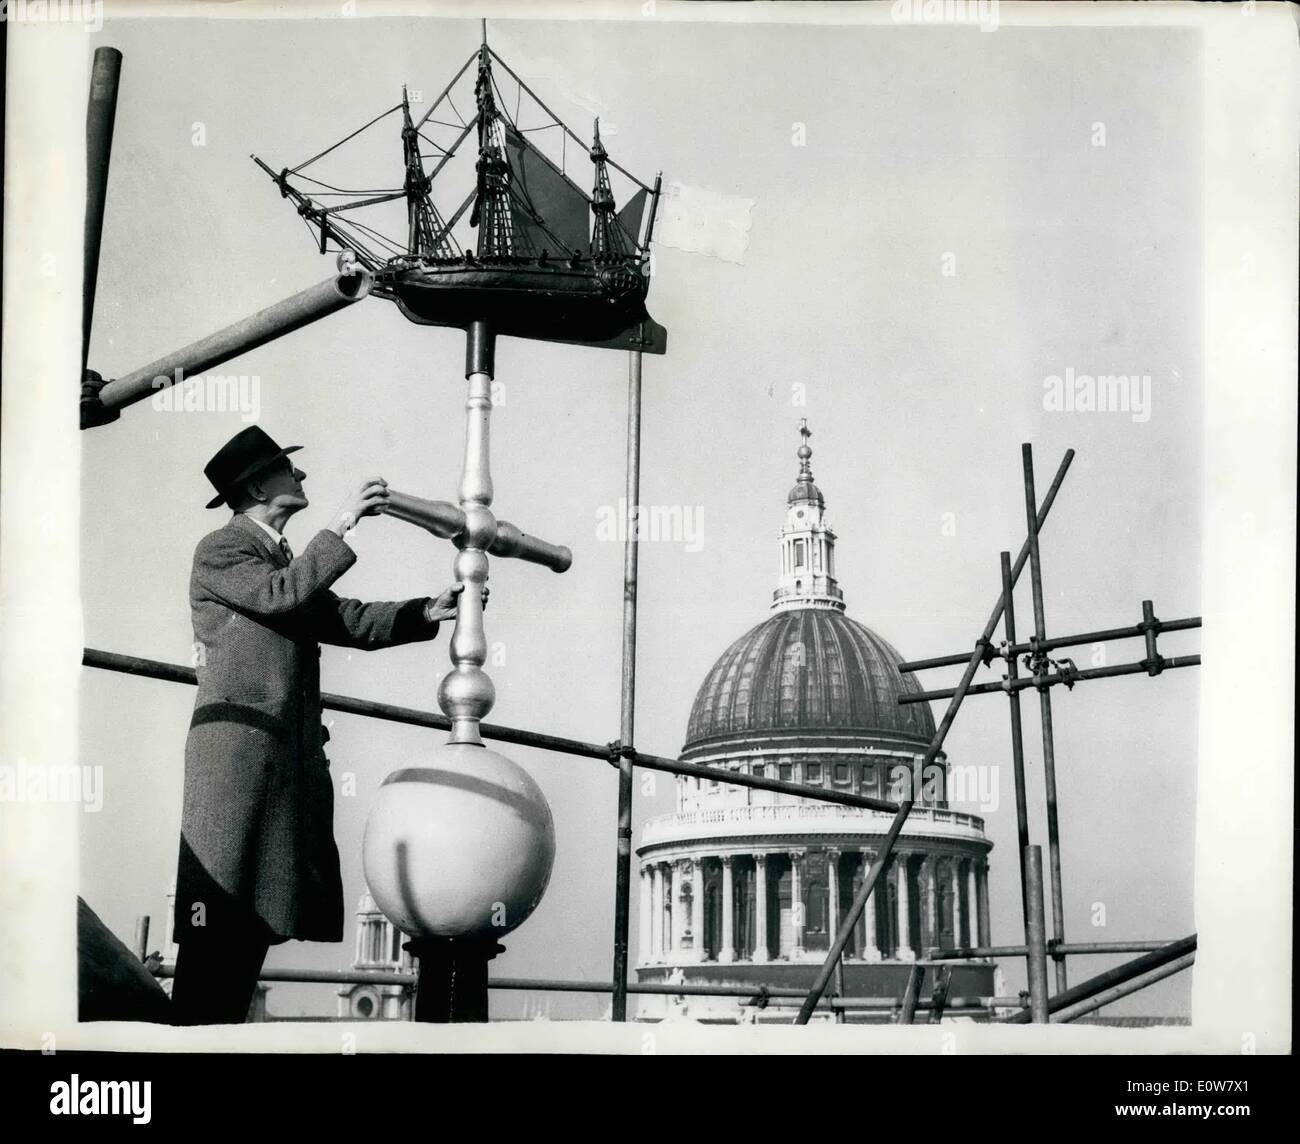 Jan. 01, 1962 - Placing Weather Vane Marks End Of Restoration Of City Church: Placing the ''ship'' weather van in position on the steeple of St. Nicholas Cole Abbay, London, marked one of the final stages of the restoration of the war-damaged church. The weather vane originally stood on St. Queenhithe, built in 1677. photo shows. A workman fitting the weather vane into position on the steeple. St. Paul's can be seen in the background. Stock Photo